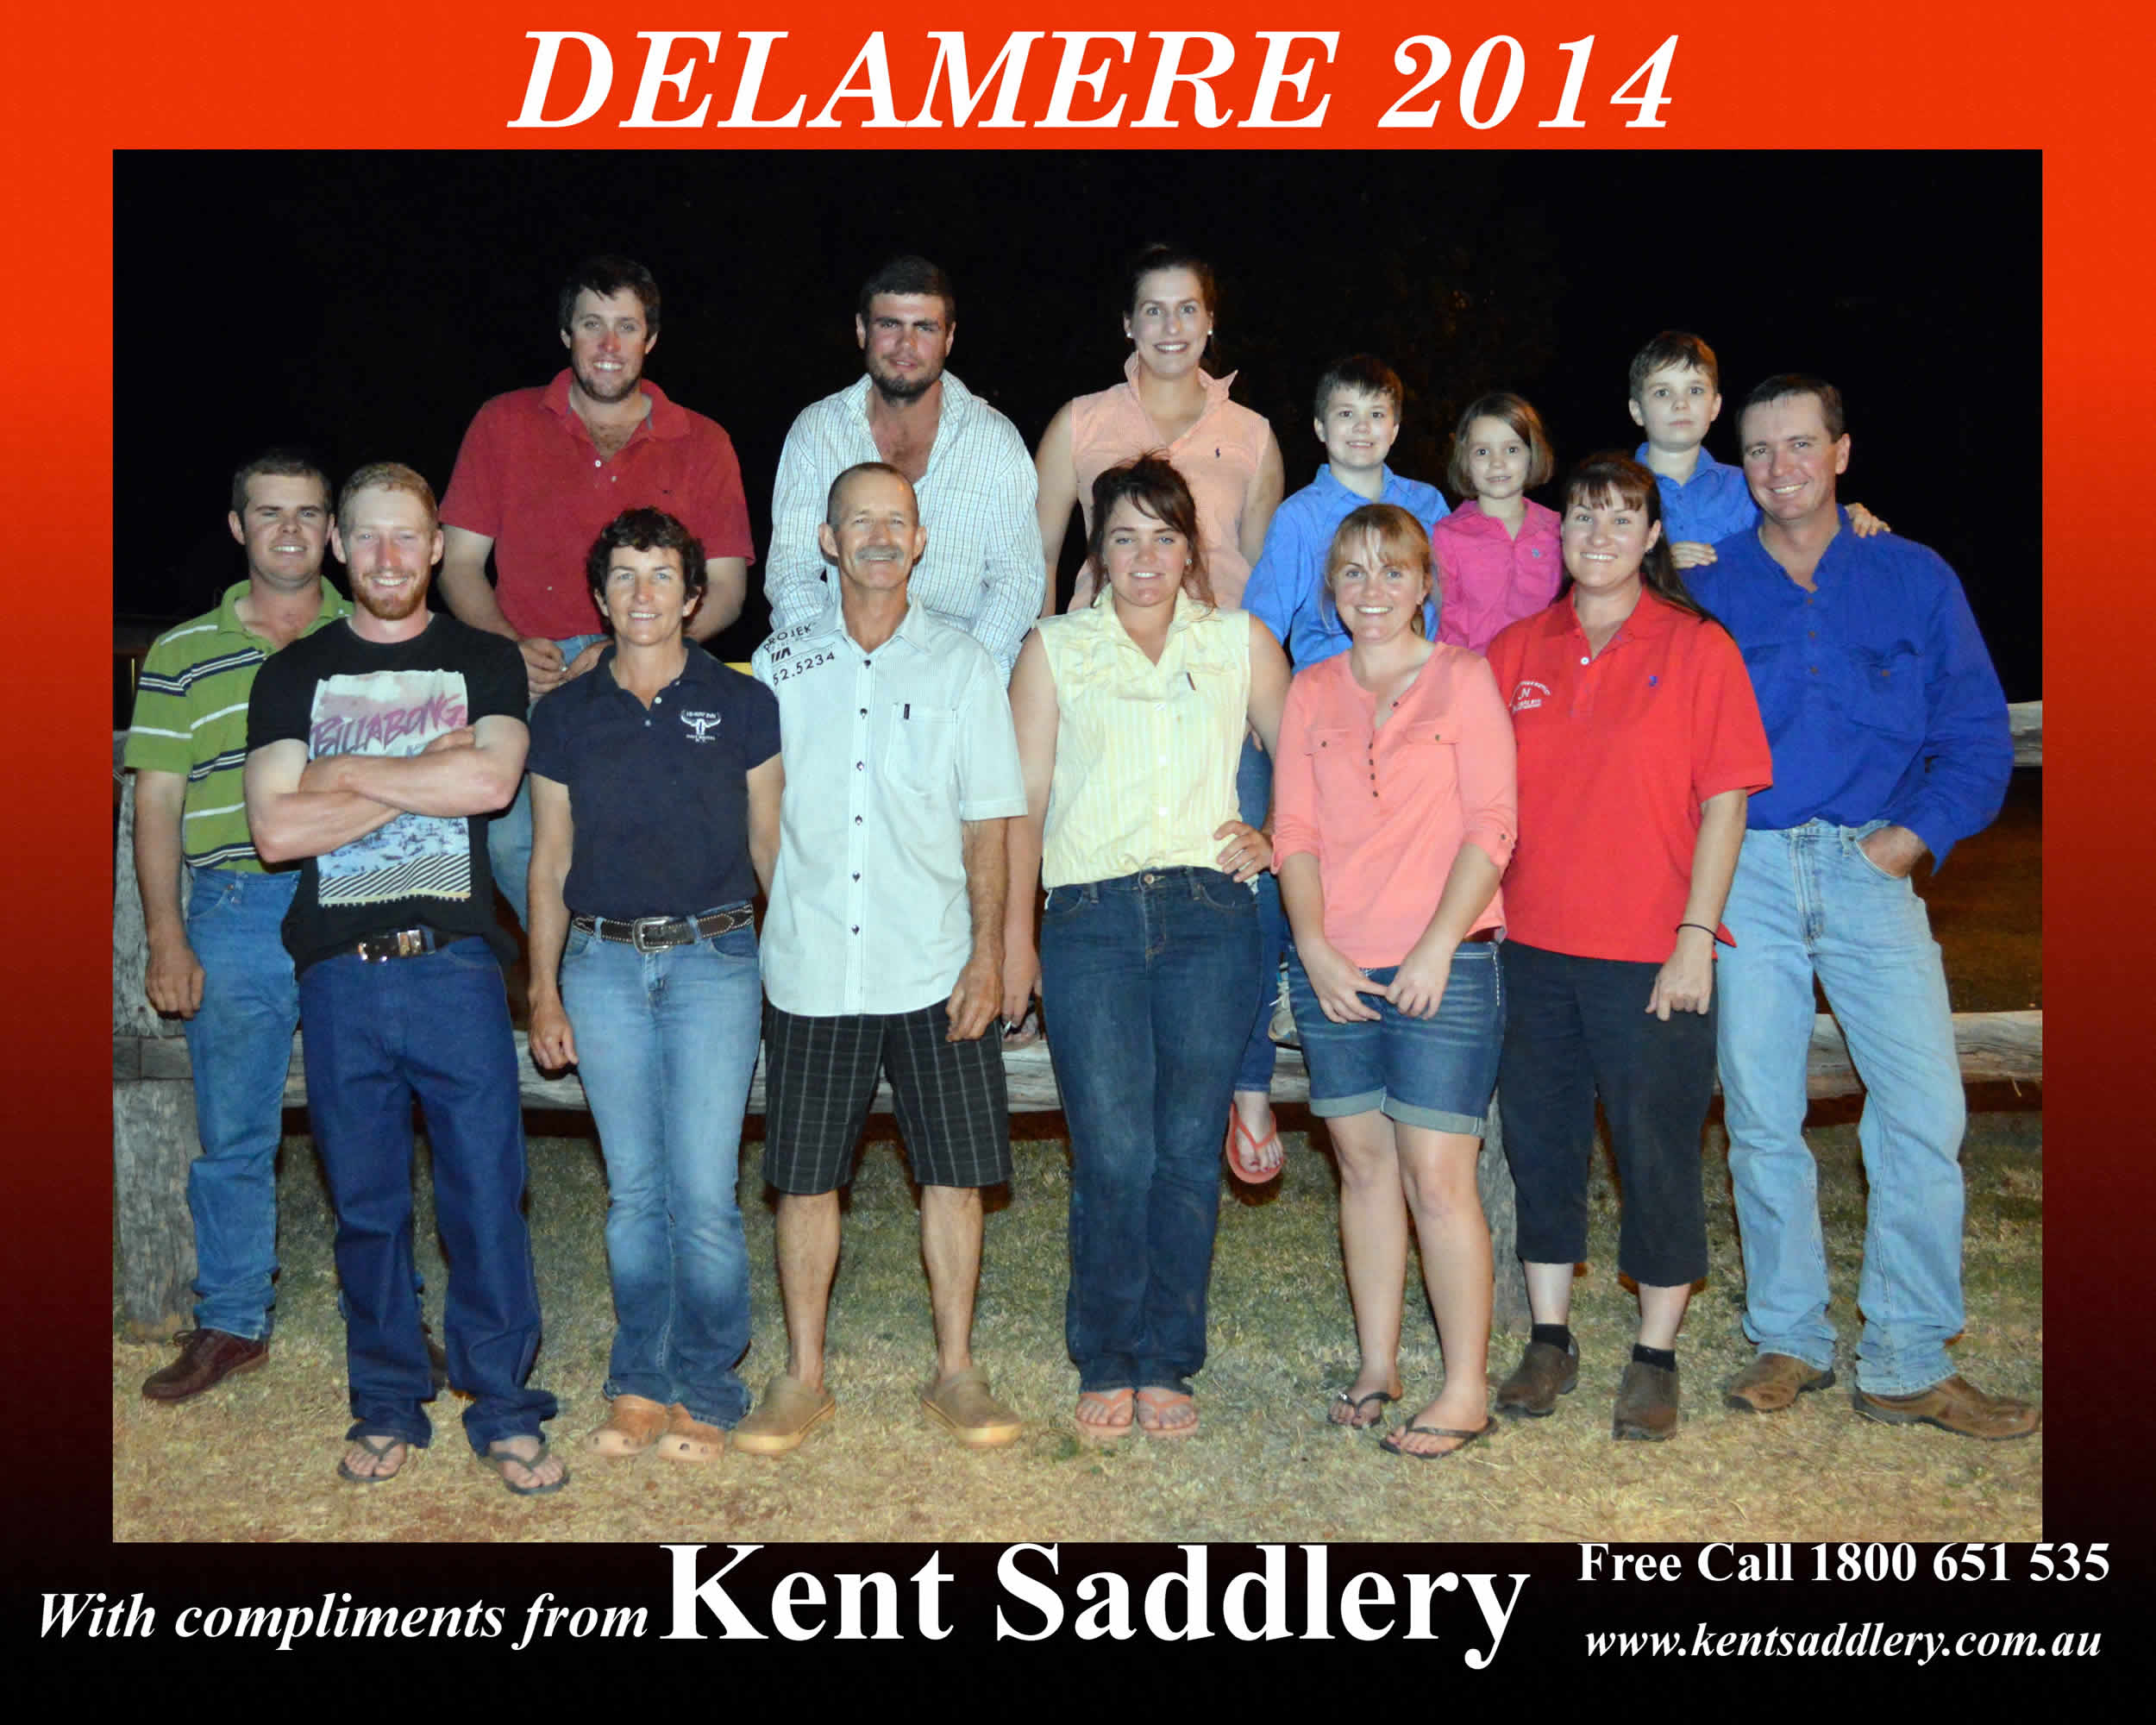 Northern Territory - Delamere 20